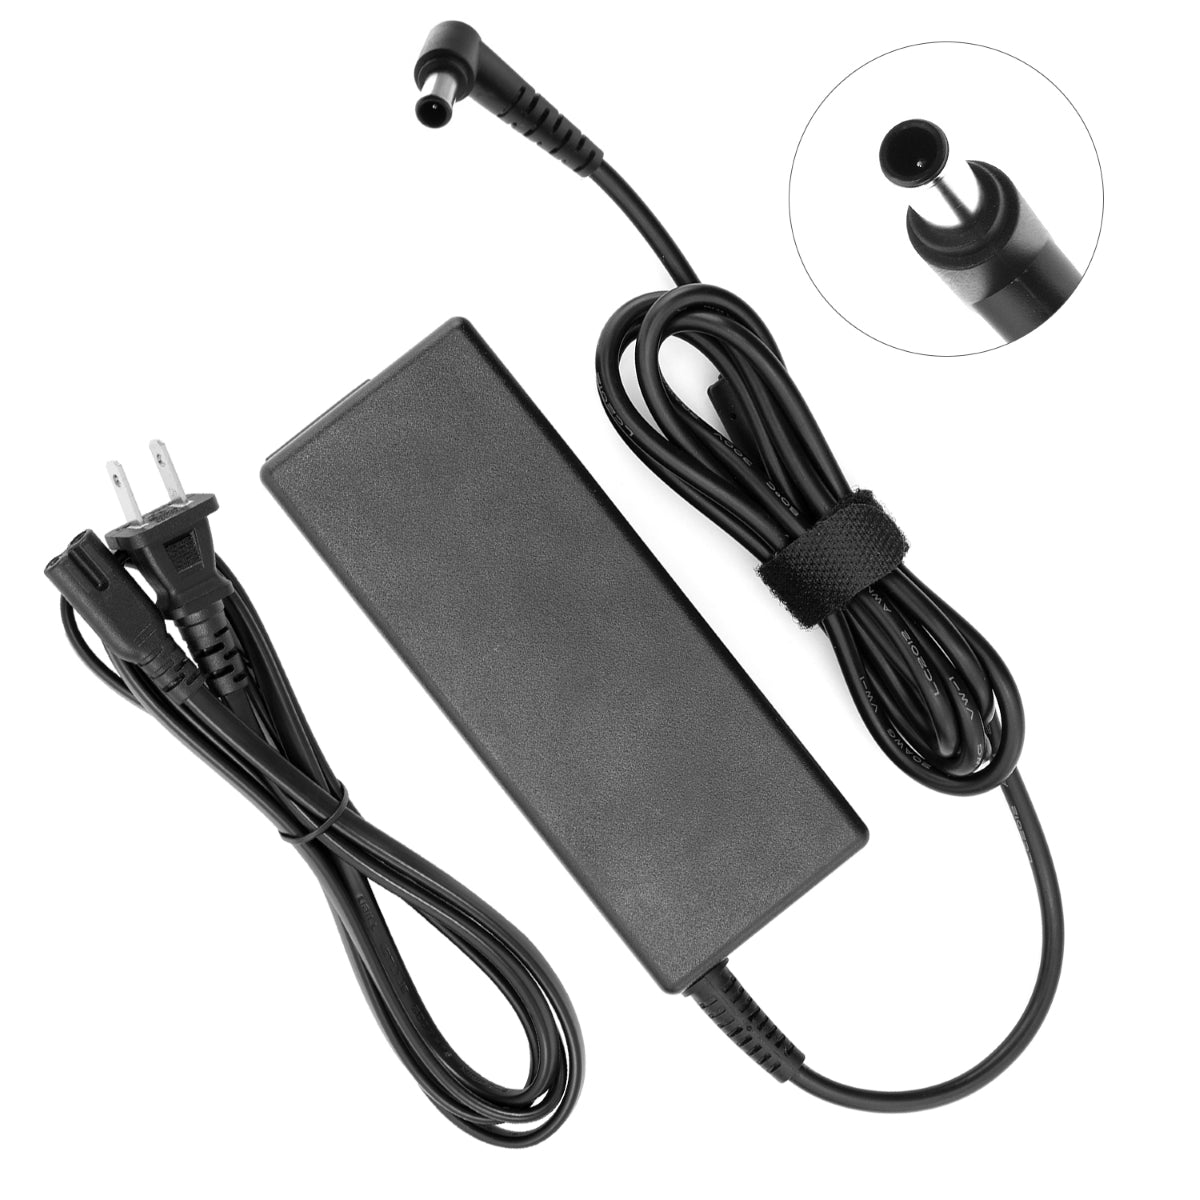 Compatible Replacement Fujitsu Lifebook P5020d Charger